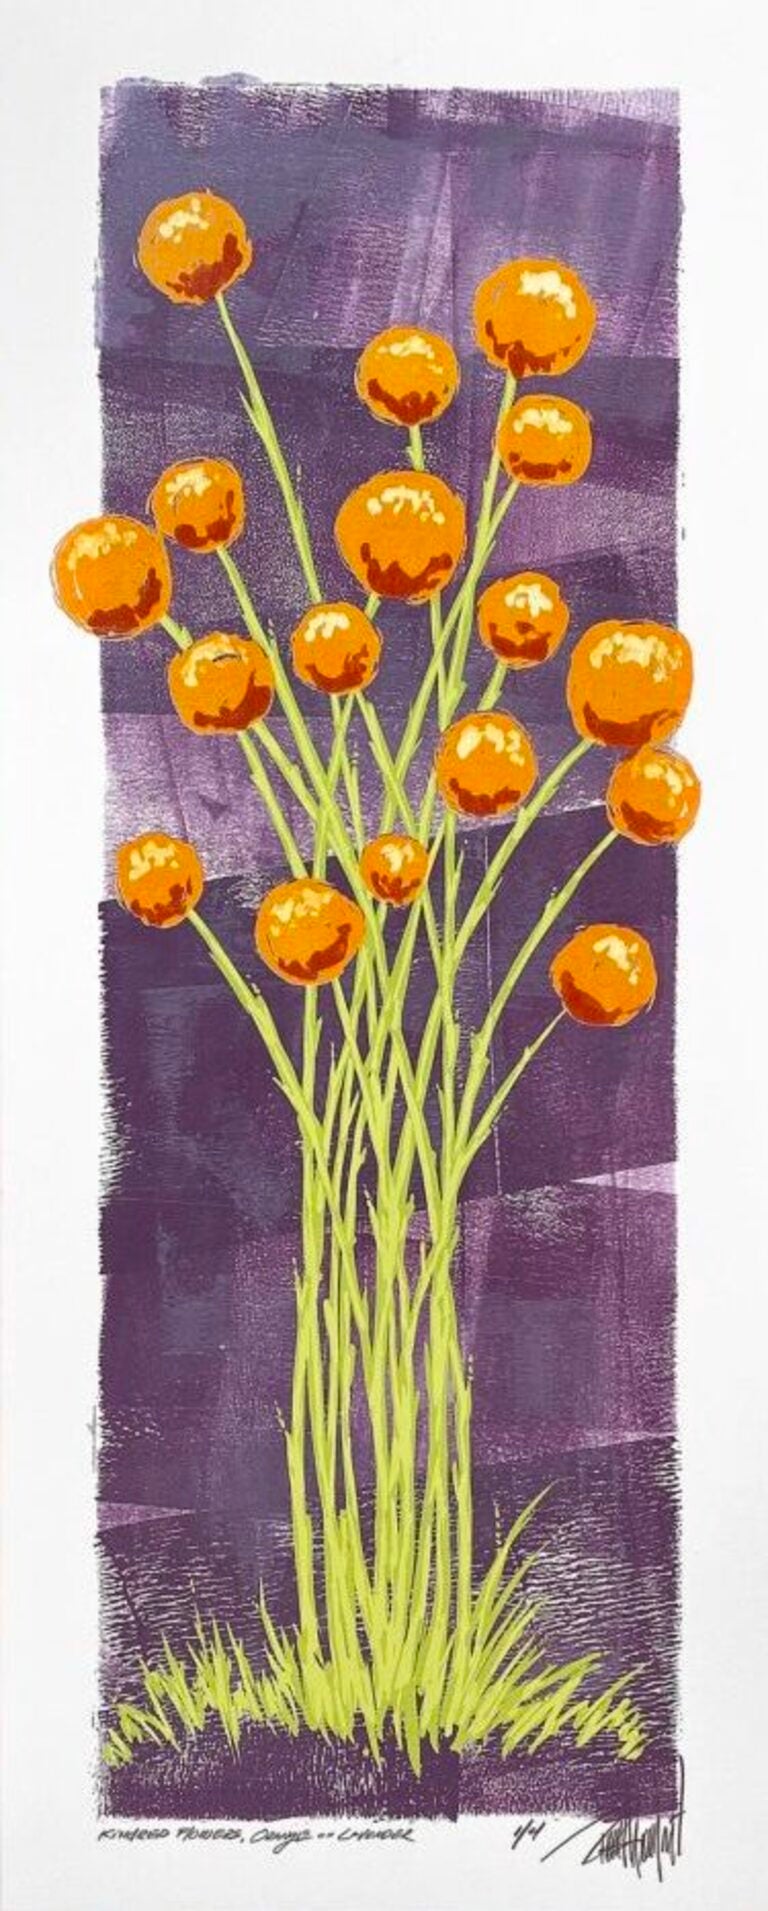 Kindred Flowers, Orange on Lavender (3/4) - Print by Terrell Thornhill 